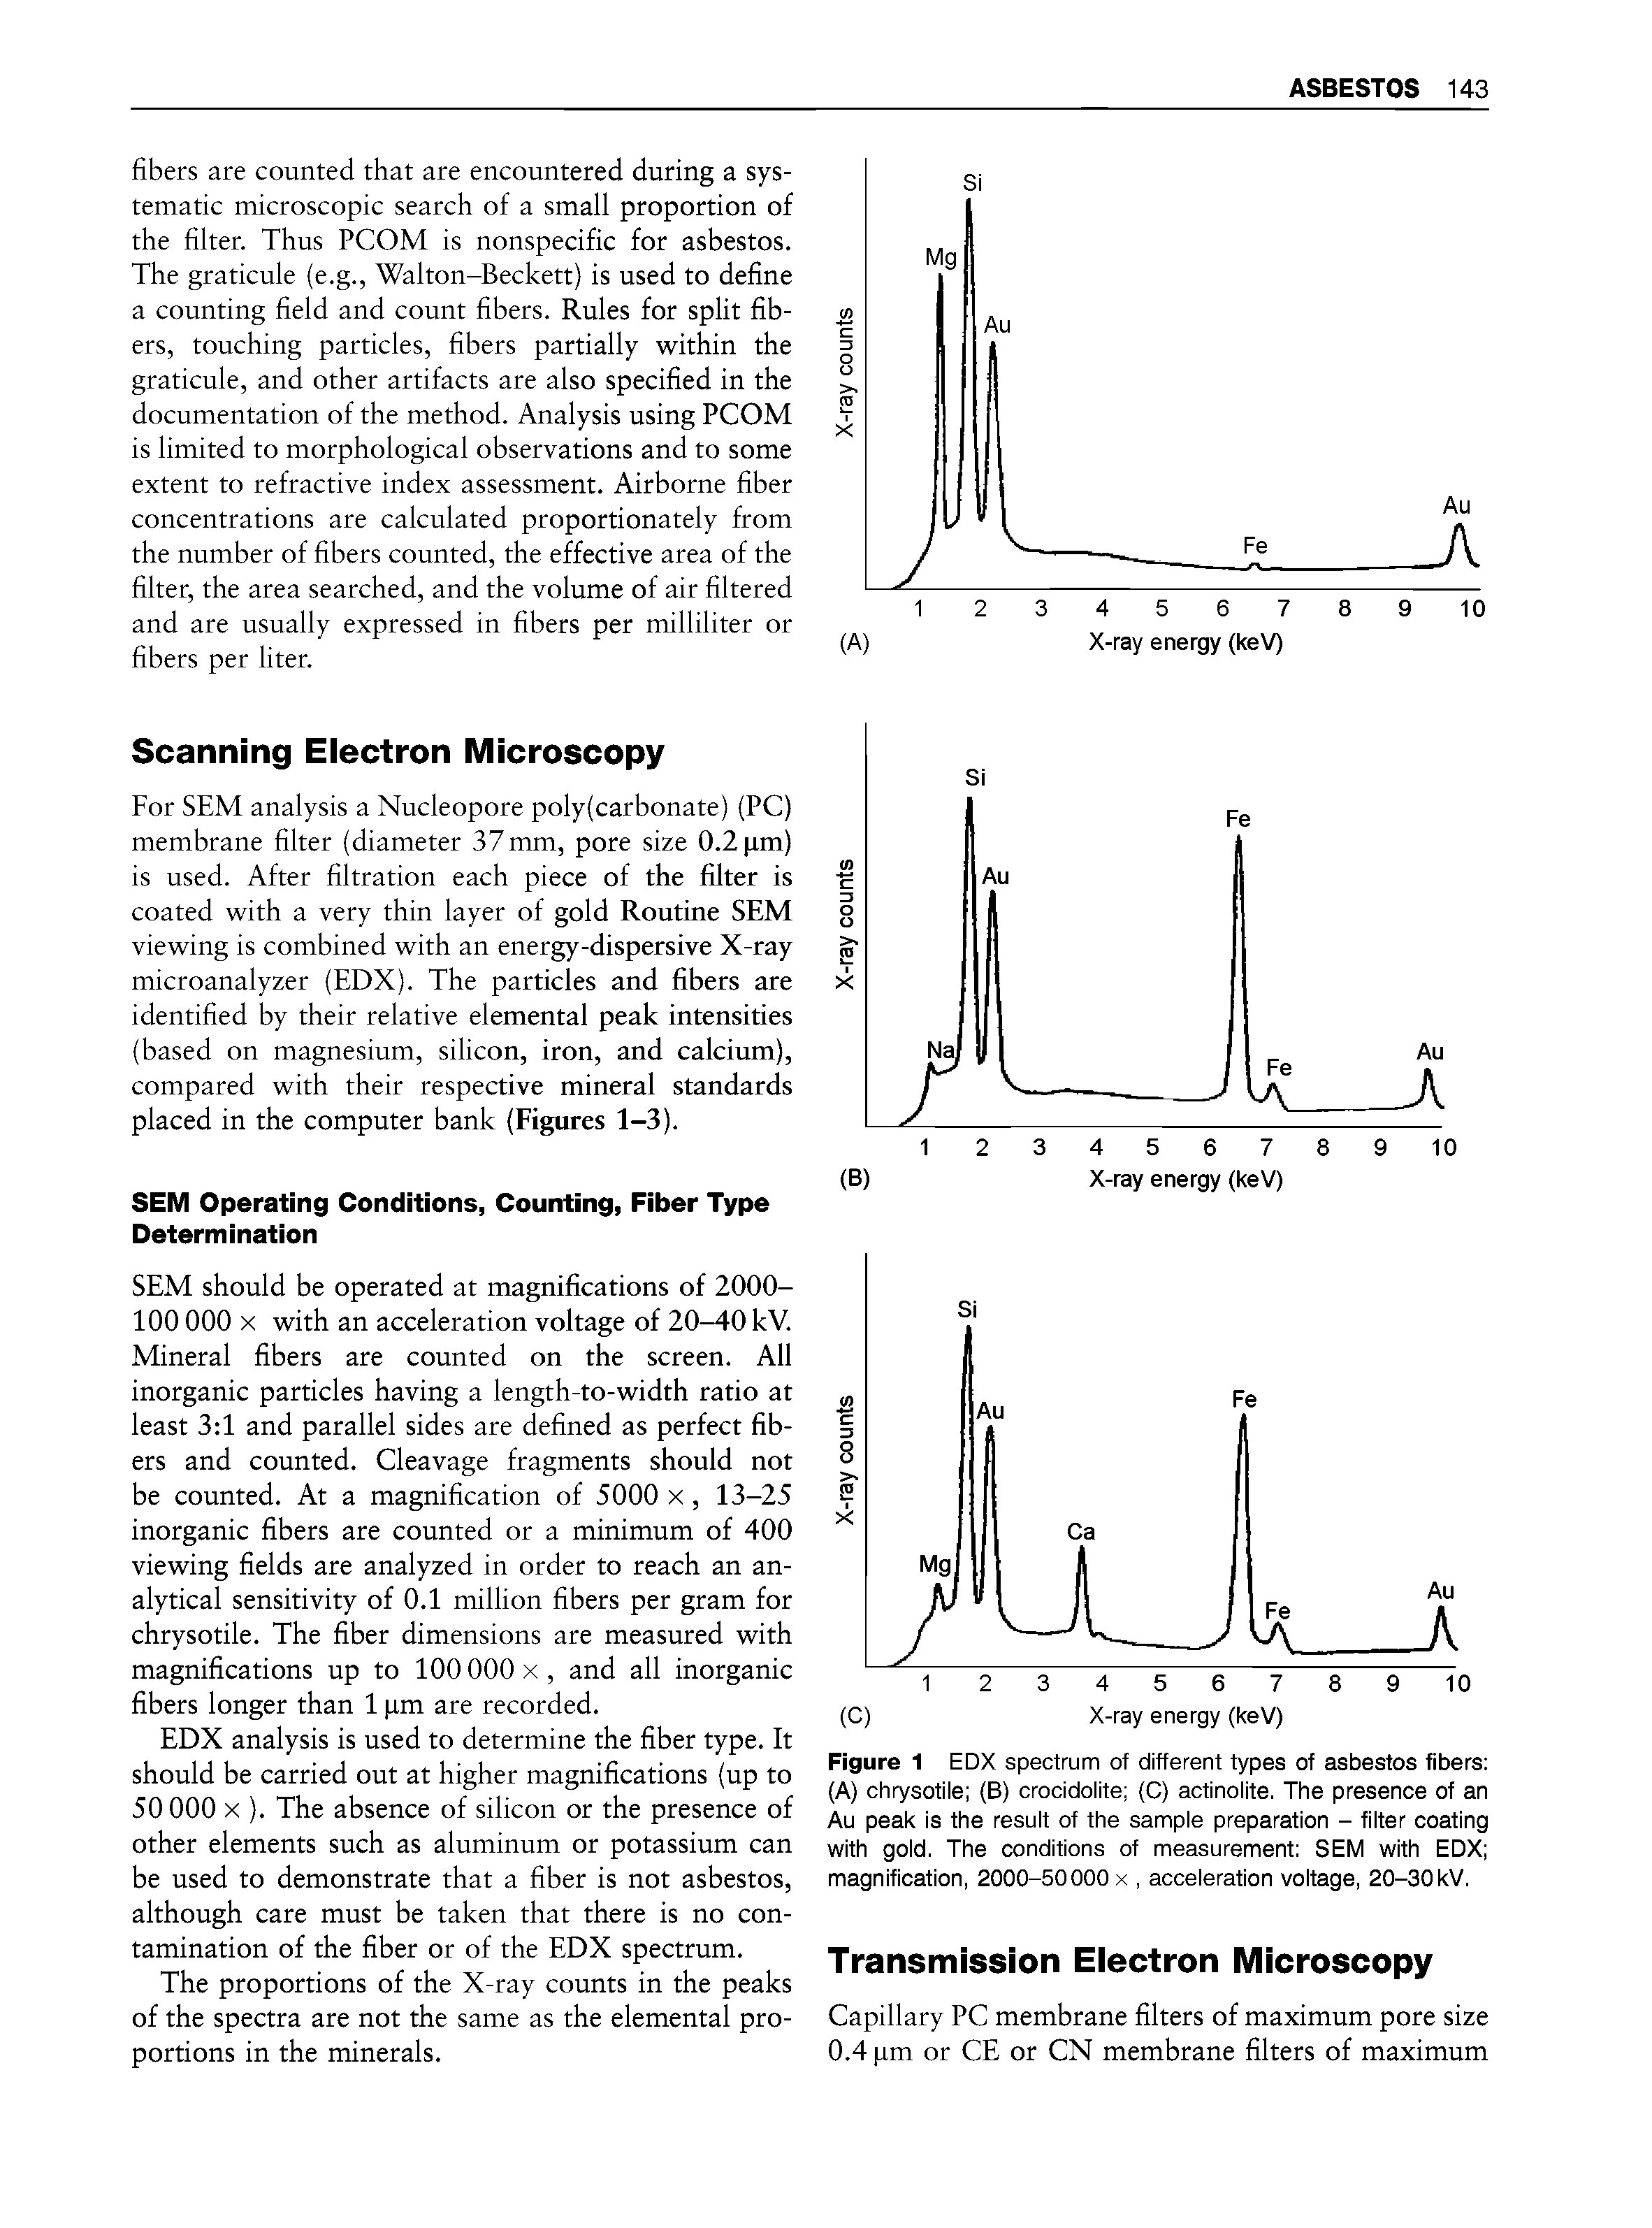 Figure 1 EDX spectrum of different types of asbestos fibers (A) chrysotile (B) crocidolite (C) actinolite. The presence of an Au peak is the result of the sample preparation - filter coating with gold. The conditions of measurement SEM with EDX magnification, 2000-50000 x, acceleration voltage, 20-30kV.